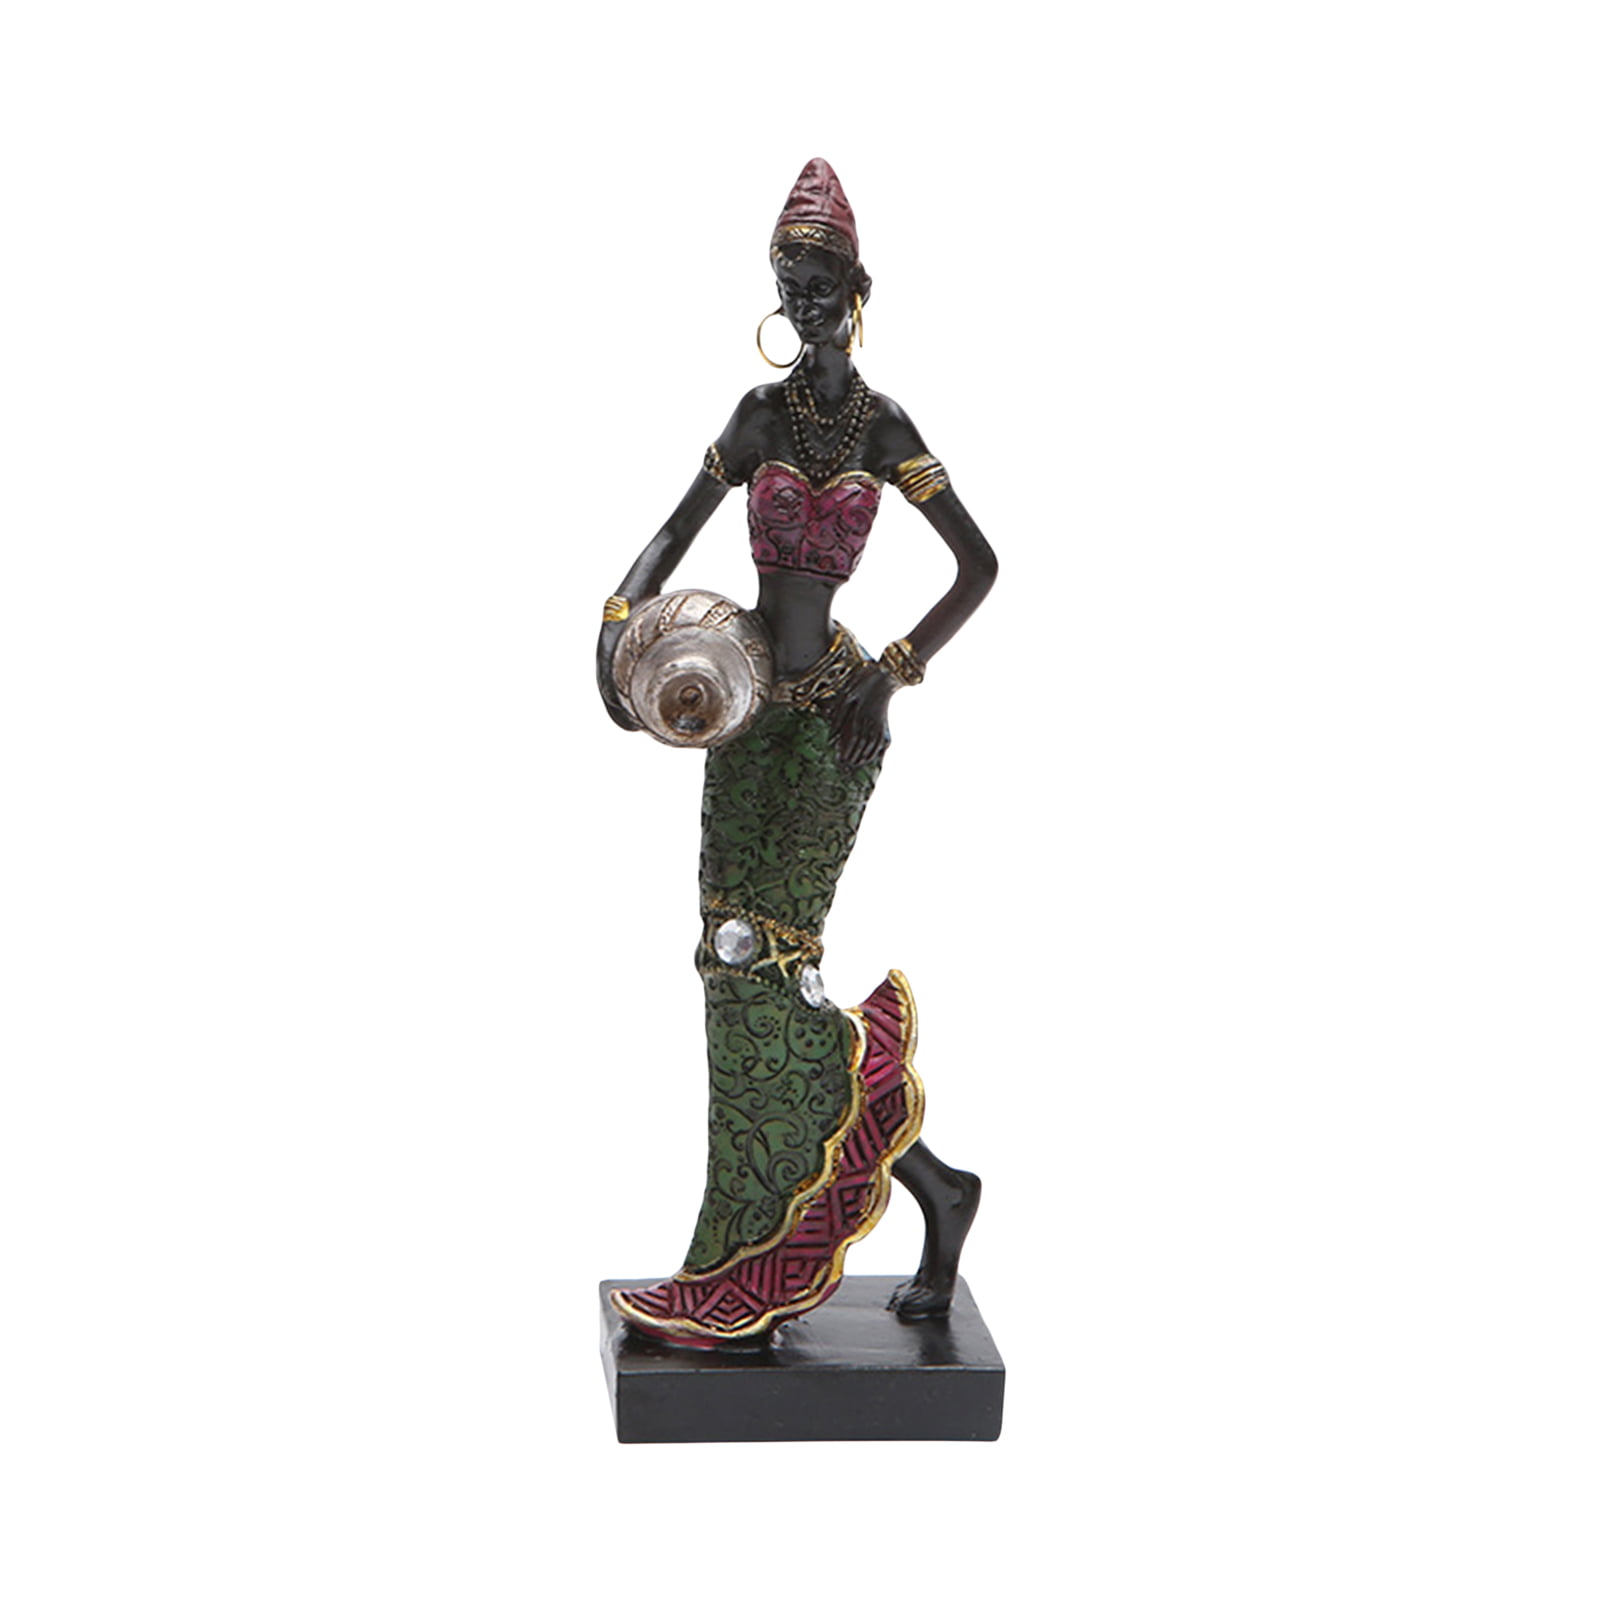 African Women Statue Resin African Female Art Home Office Decor ，African Ornaments 